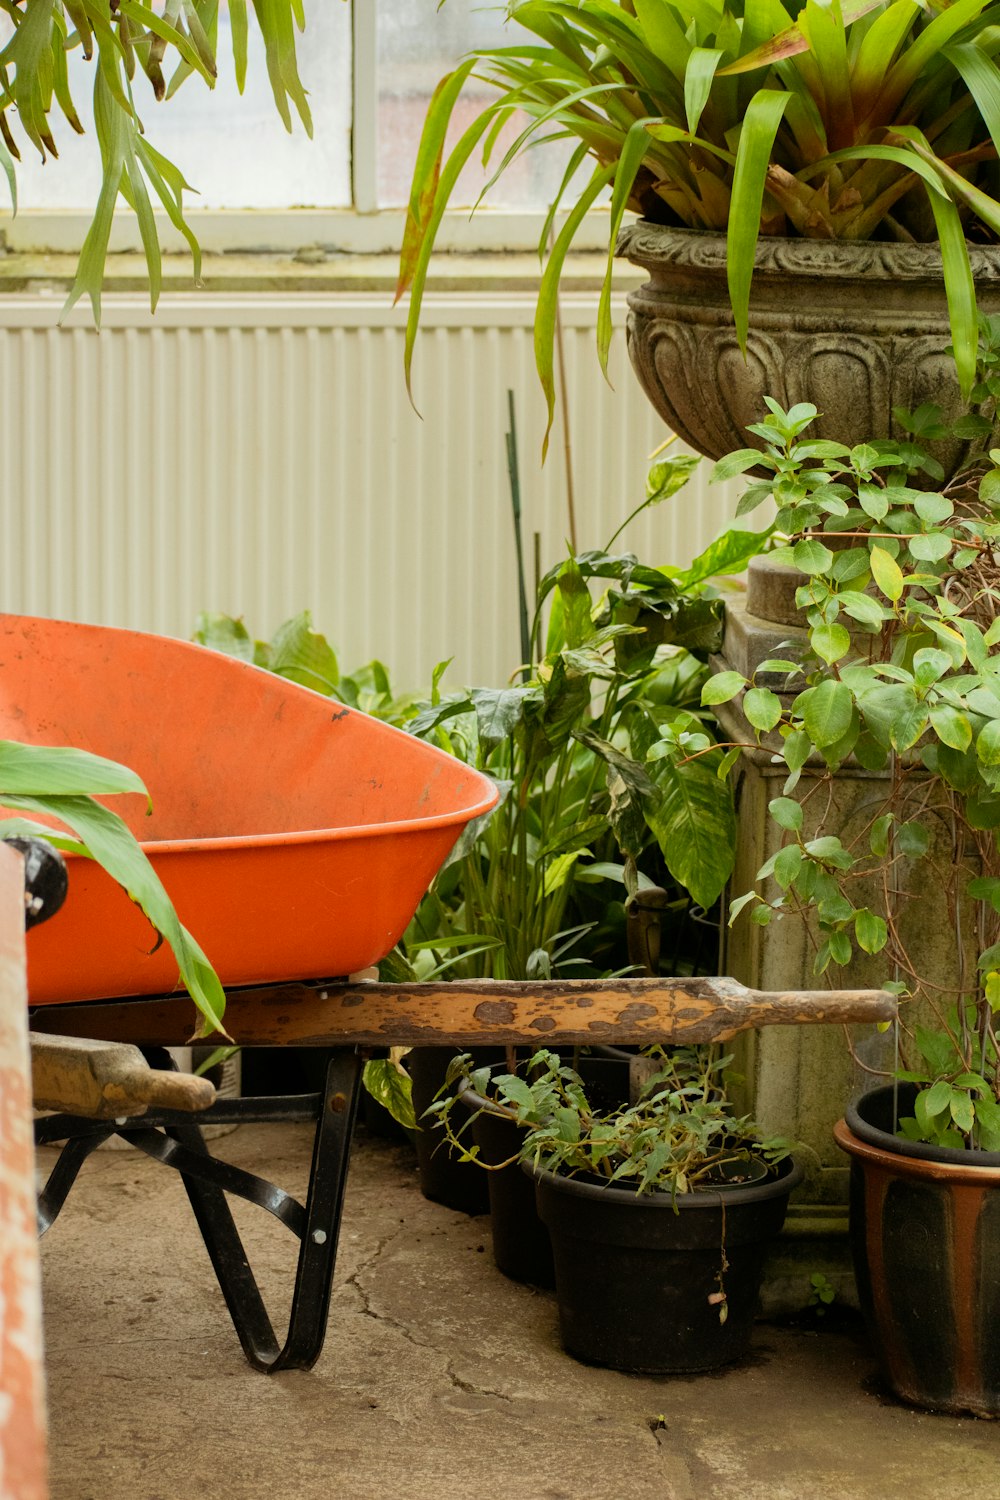 a wheelbarrow with plants in it sitting on the ground